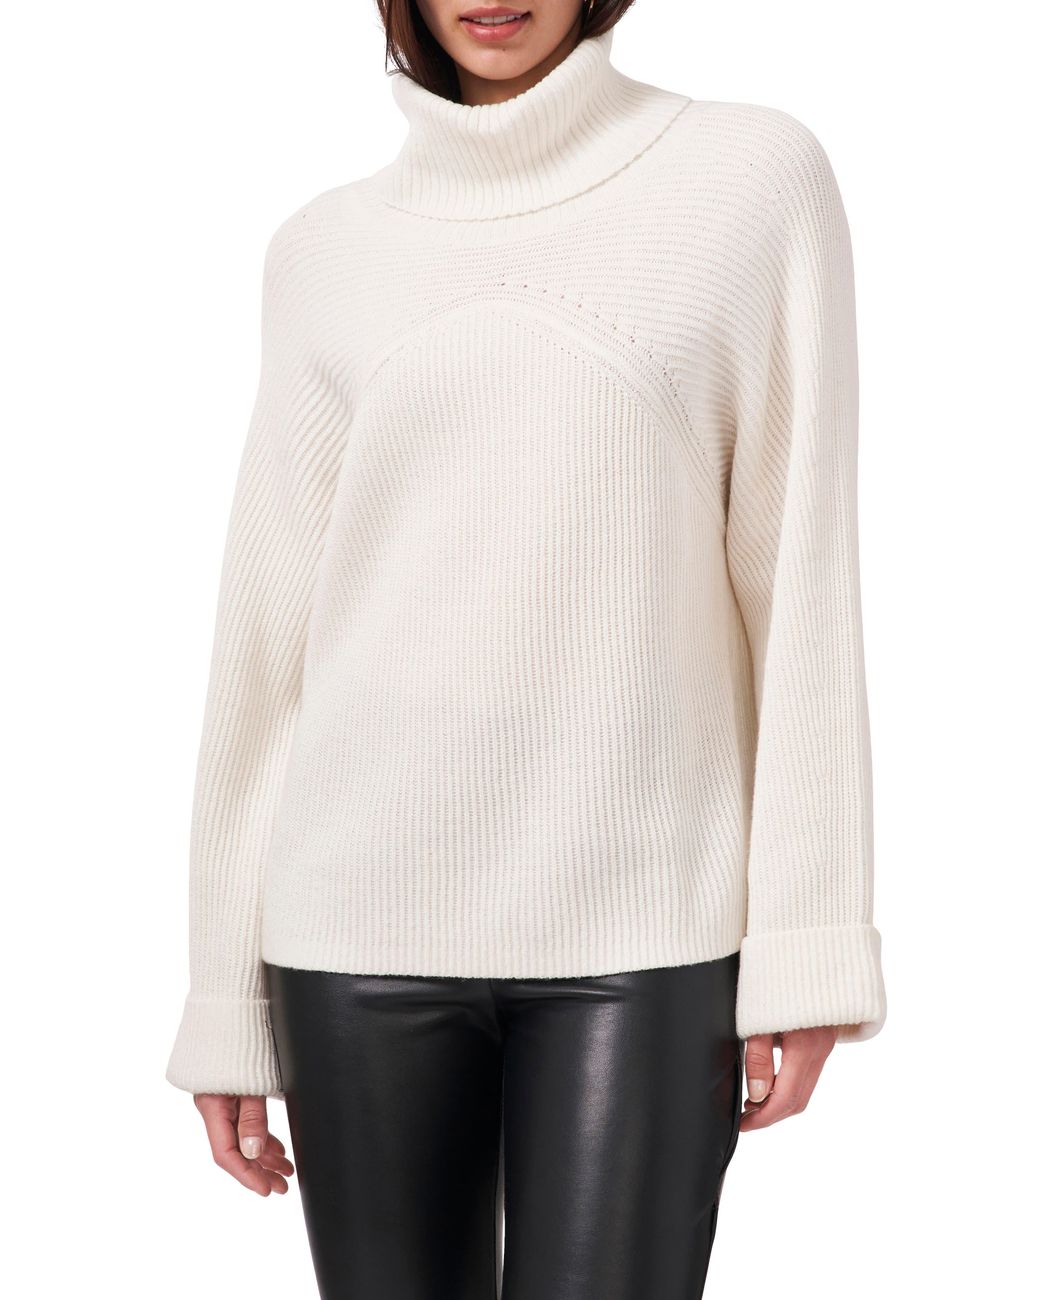 Vince Camuto Roll Cuff Turtleneck Sweater in White | Lyst